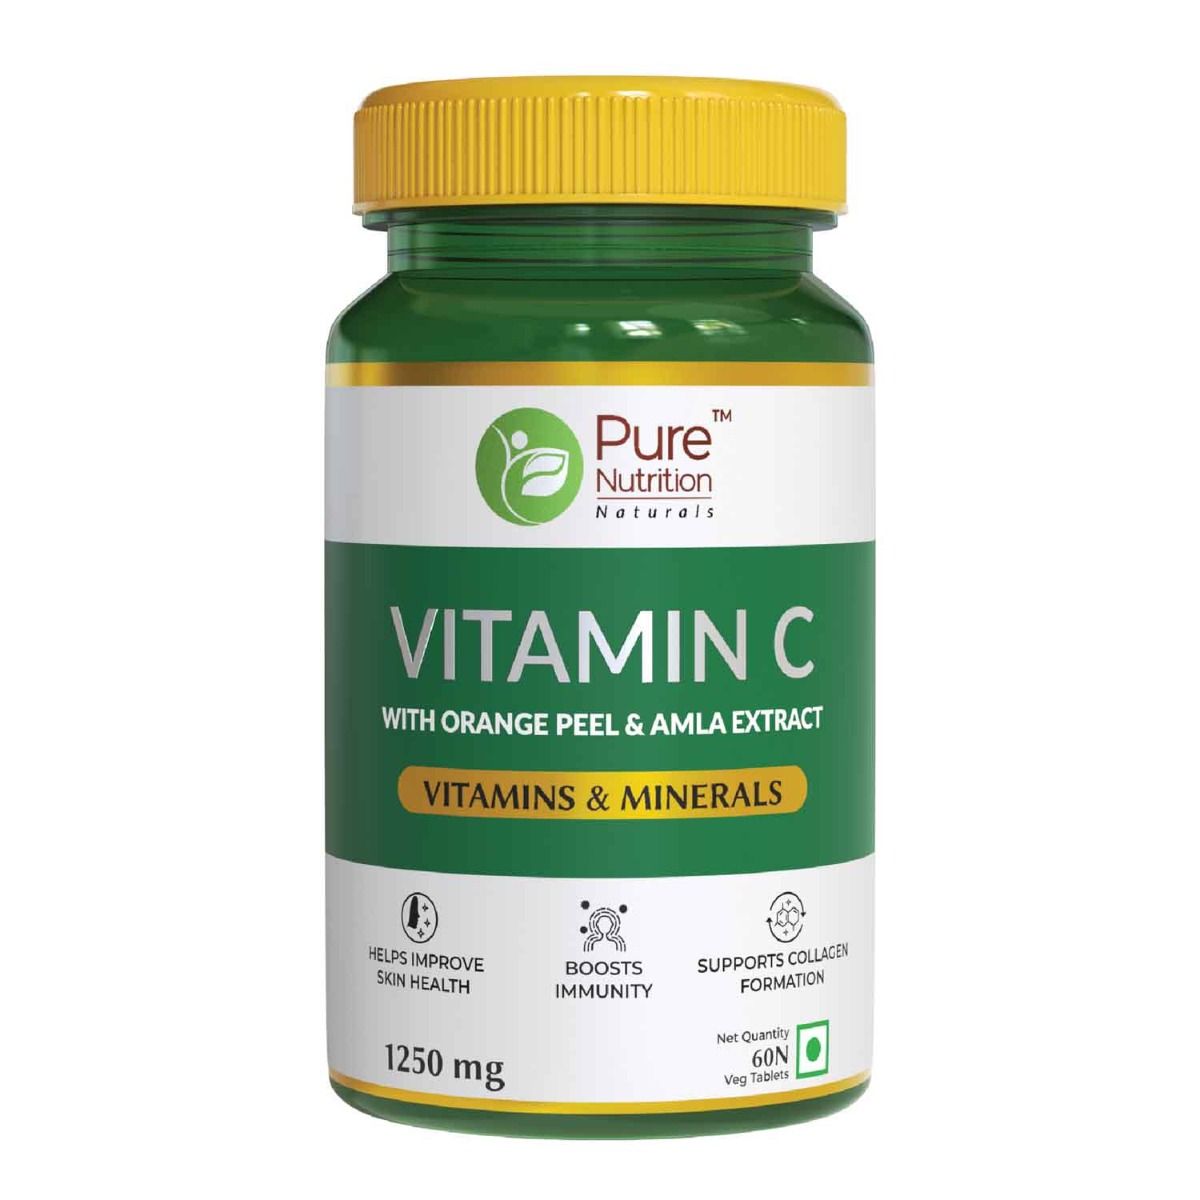 Pure Nutrition Vitamin C, 60 Tablets, Pack of 1 